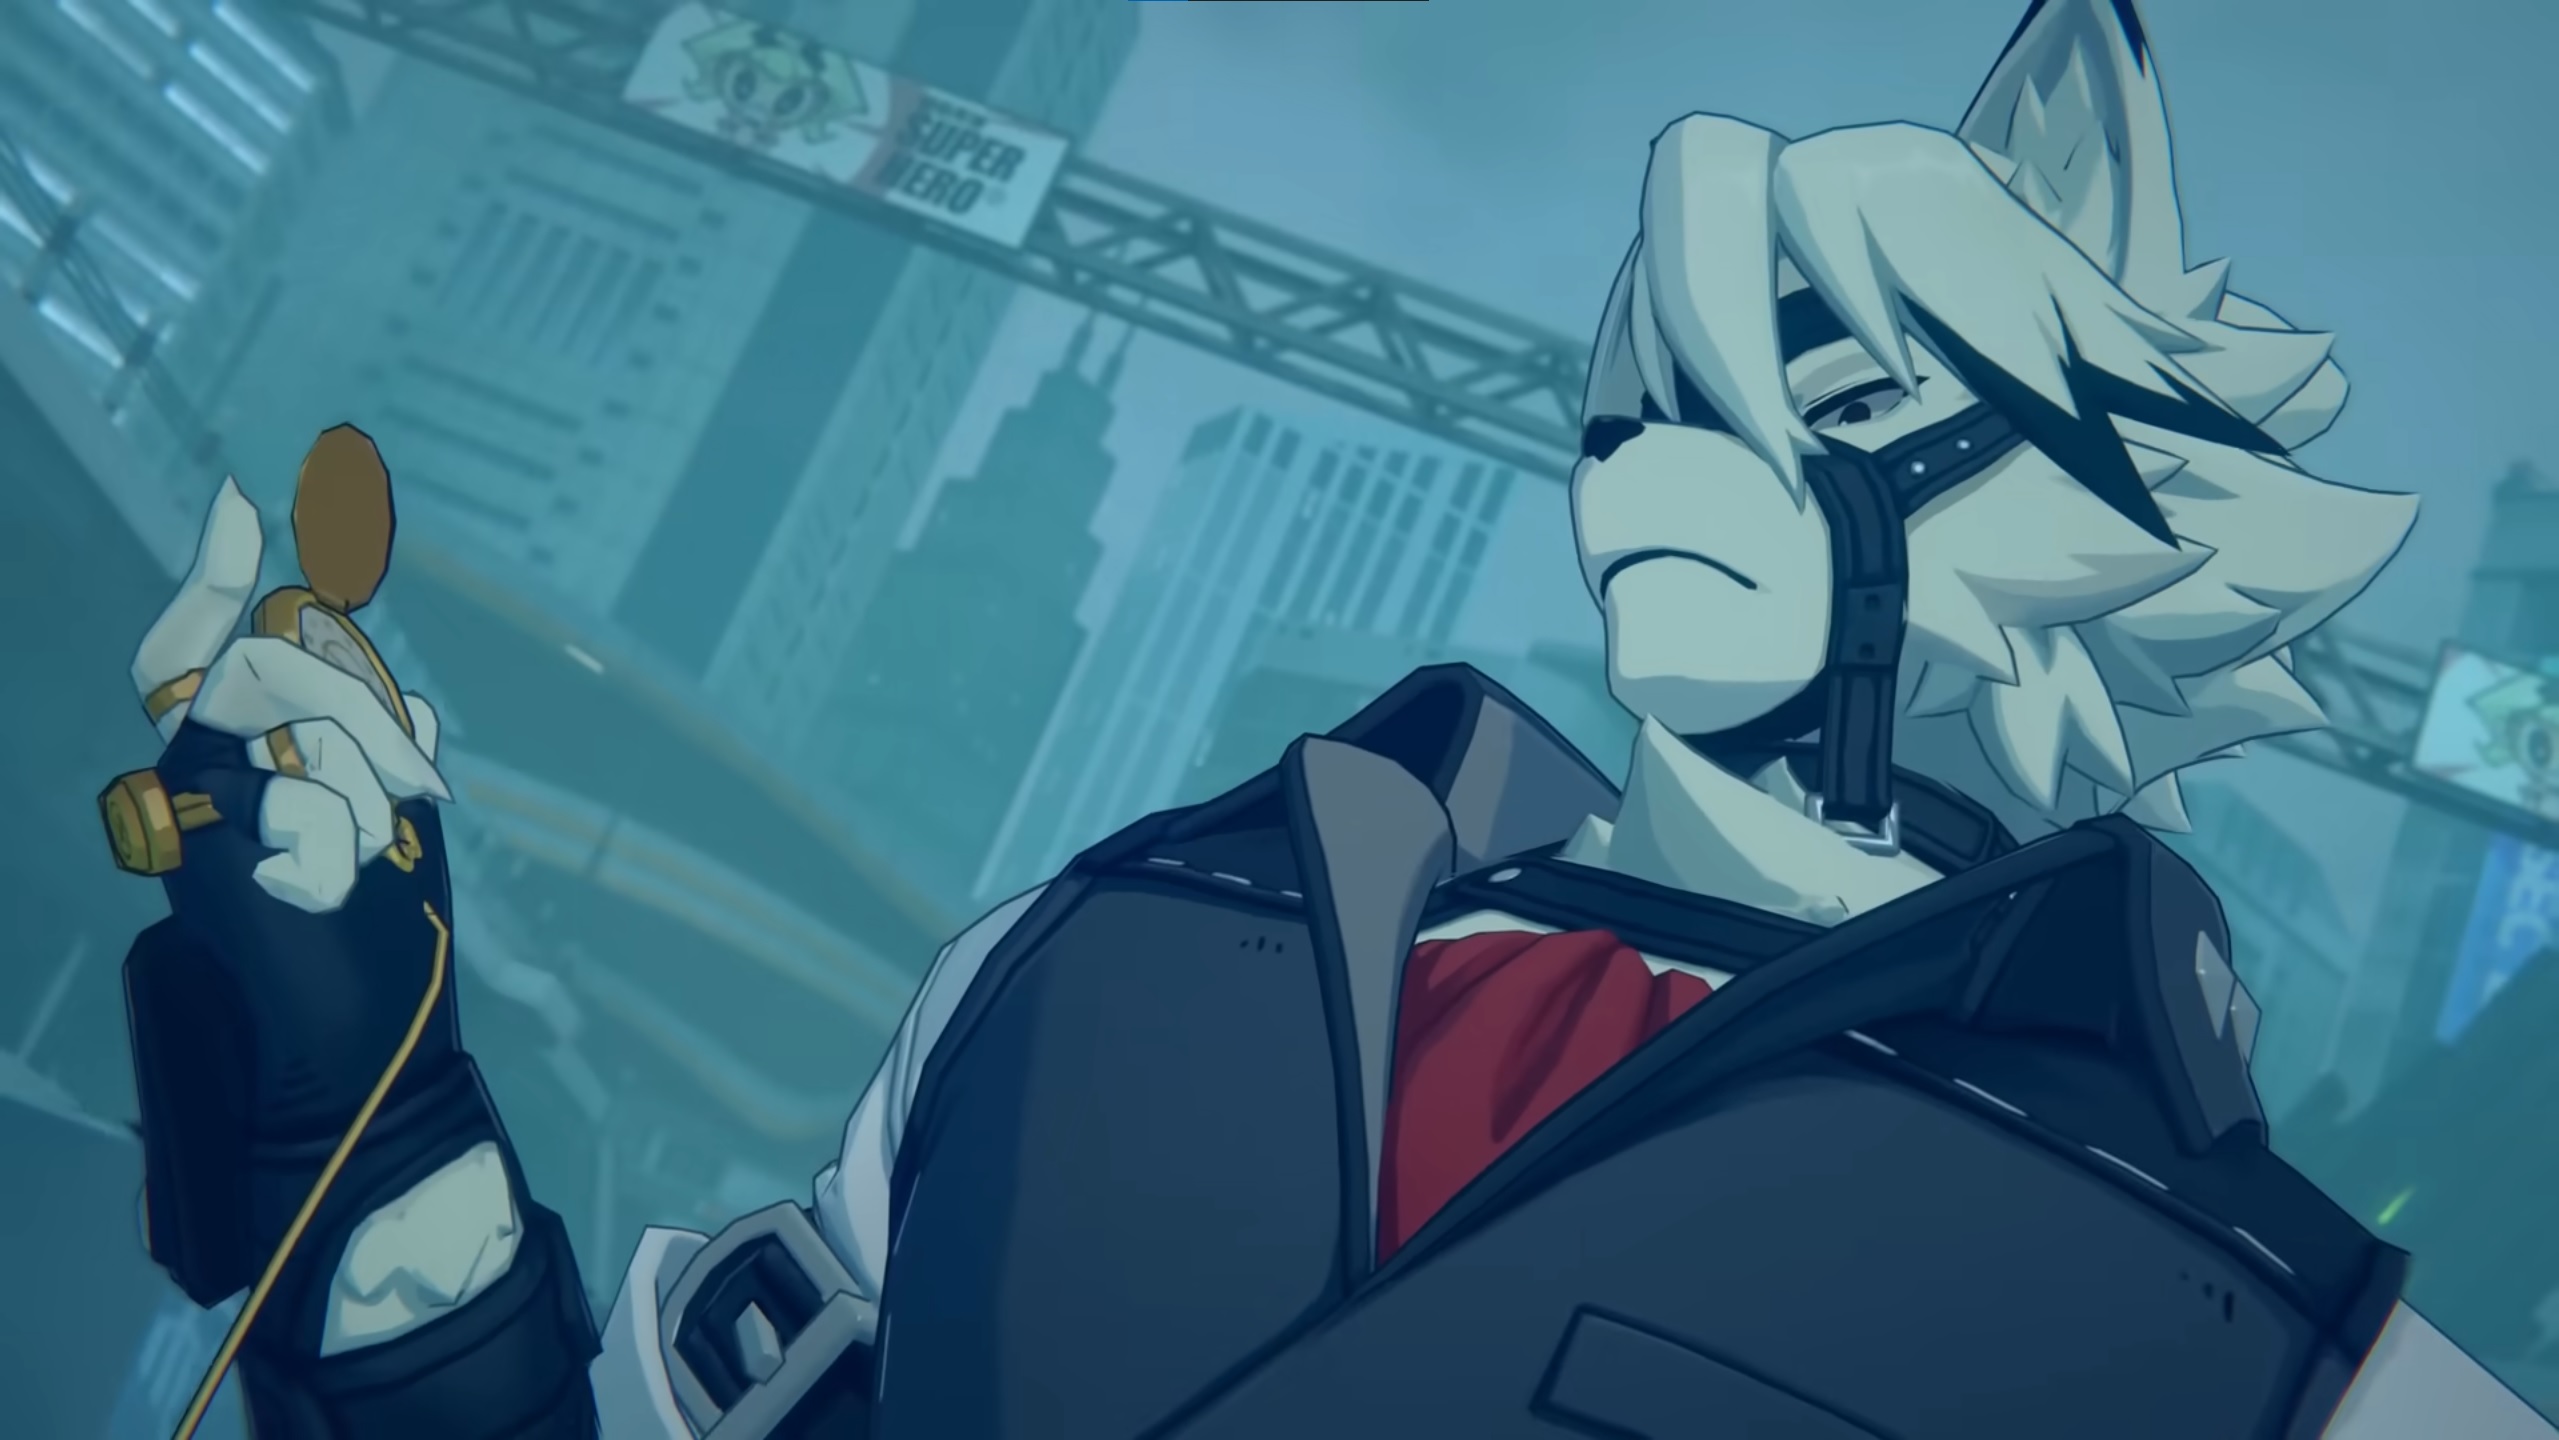 Zenless Zone Zero - A white-haired wolf character wears a vest, red cravat, and a muzzle while holding a gold pocketwatch.